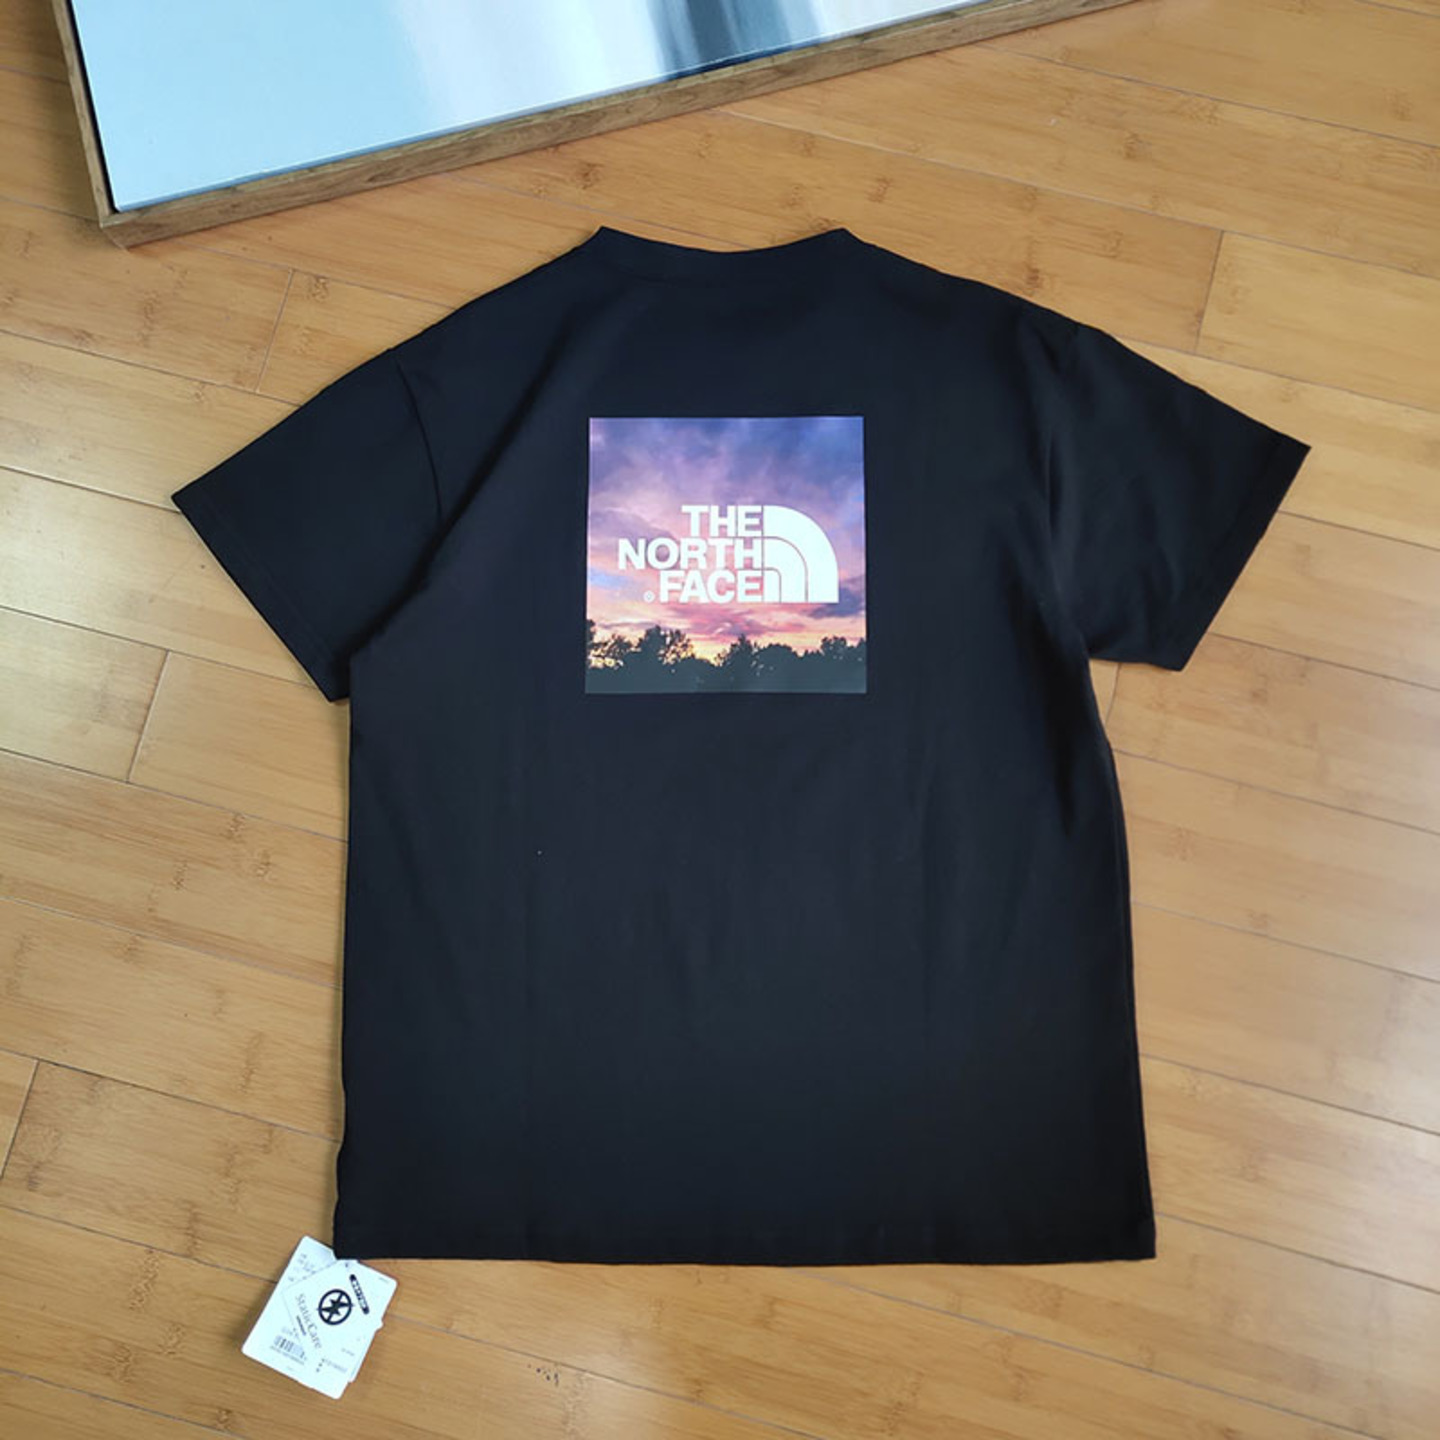 The North Face city scenery t-Shirt